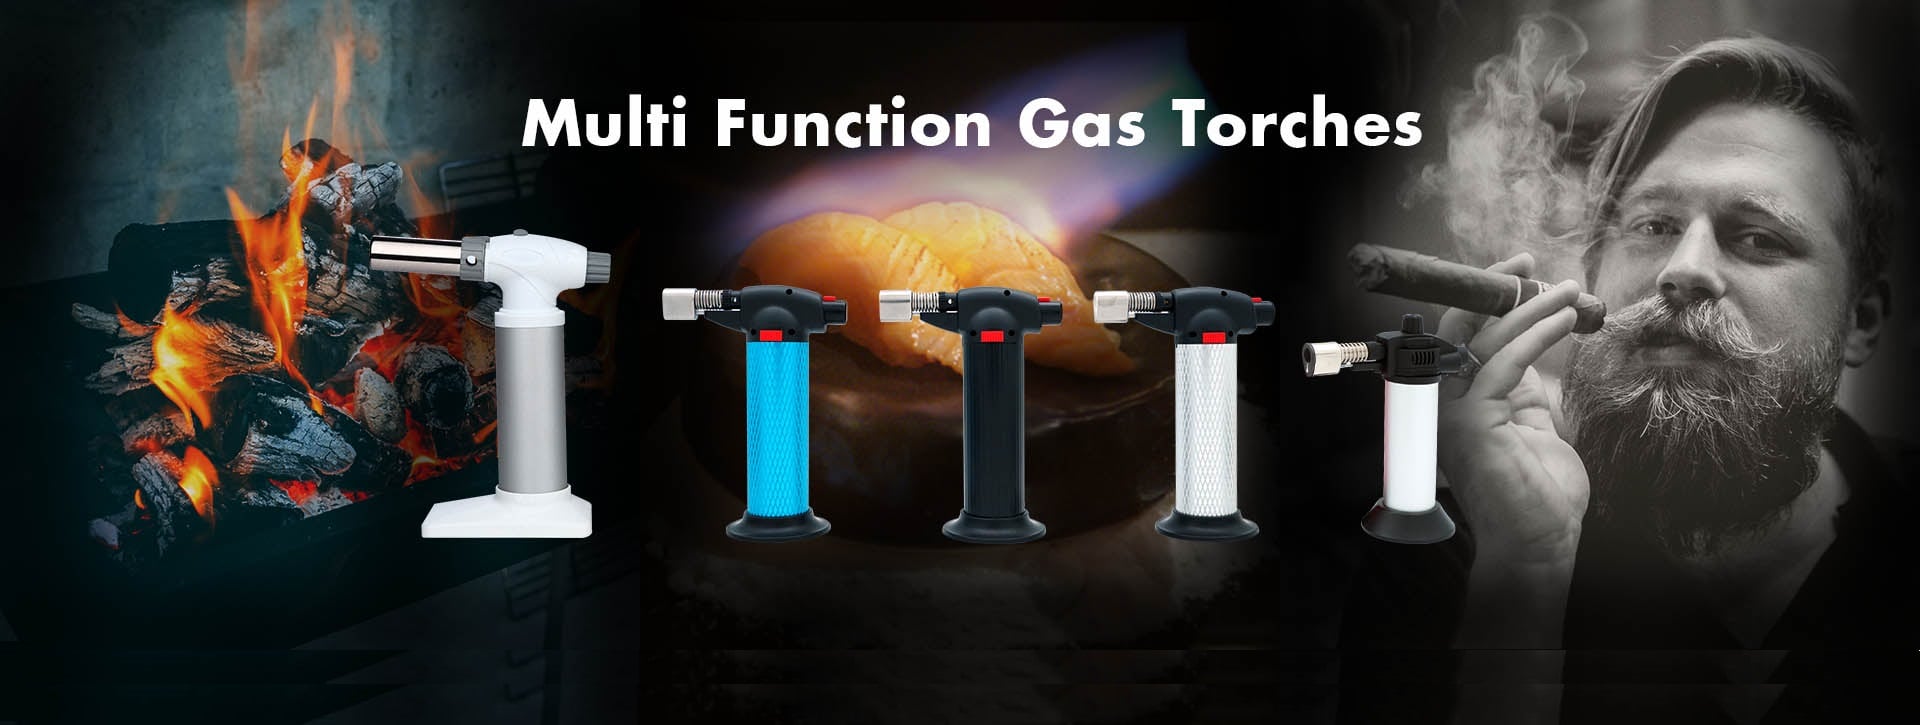 multi function gas torches